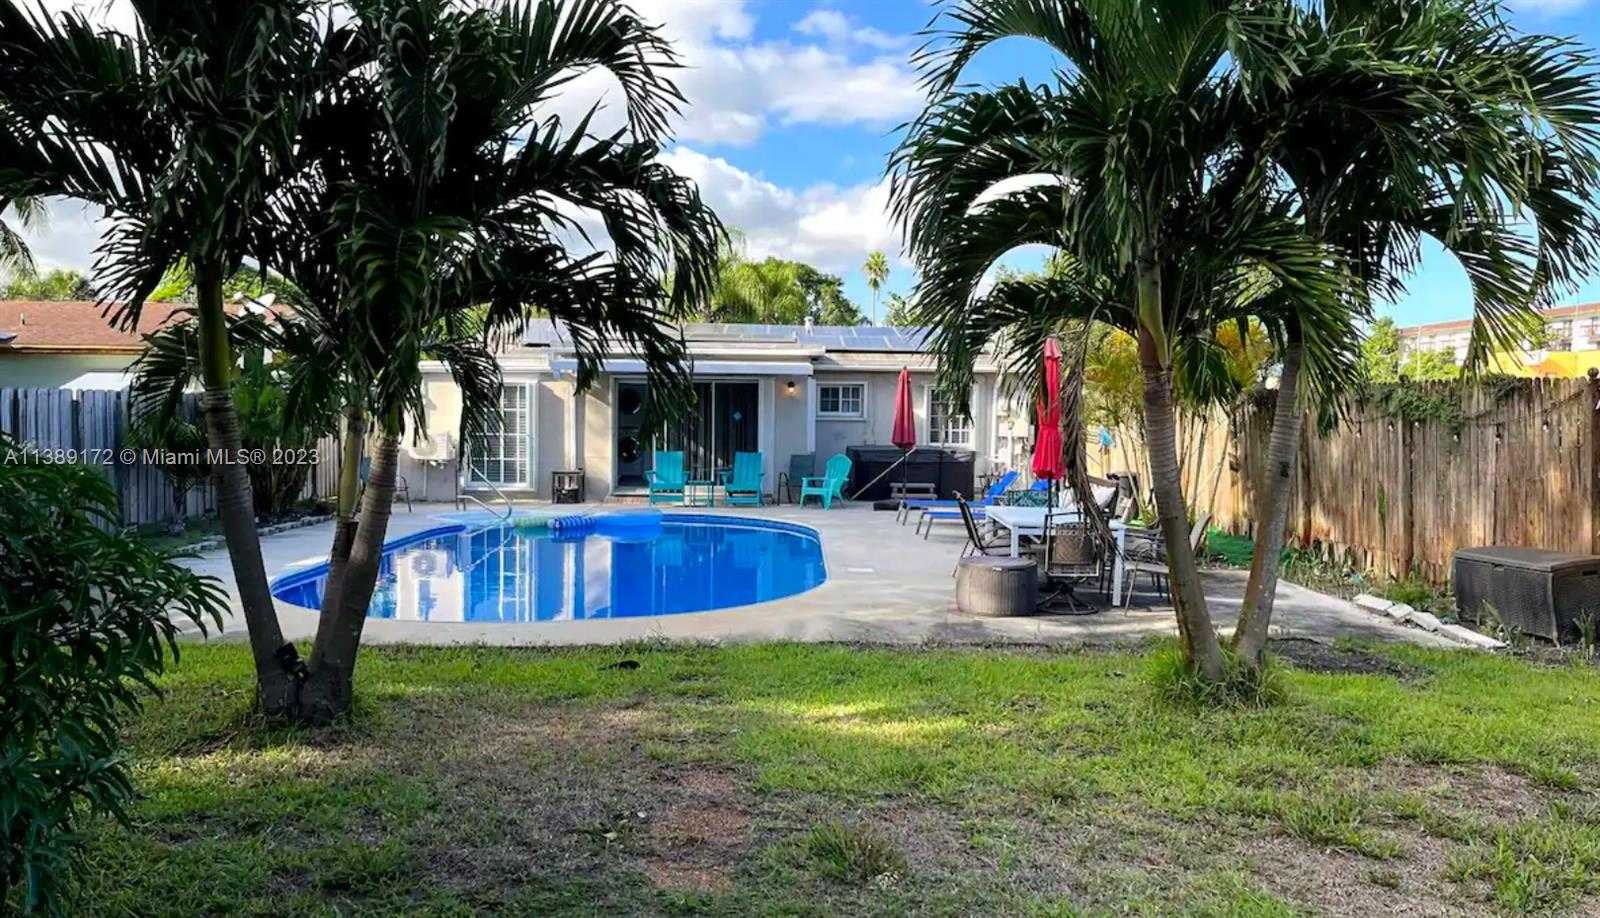 View Wilton Manors, FL 33311 house